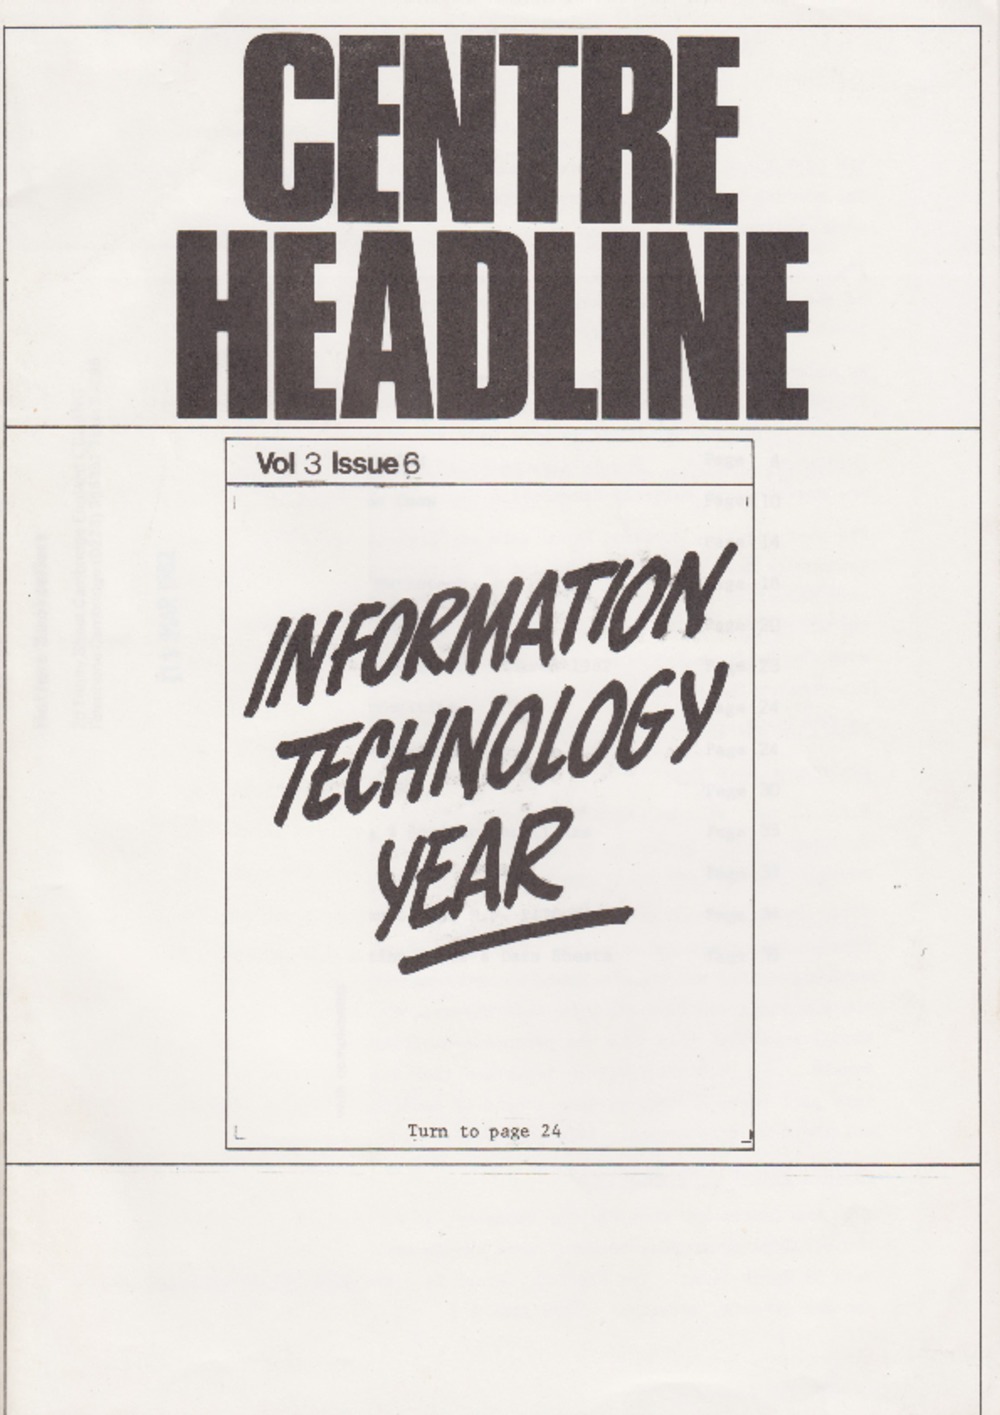 Article: Centre Headline - Vol 3 Issue 6 - Information Technology Year